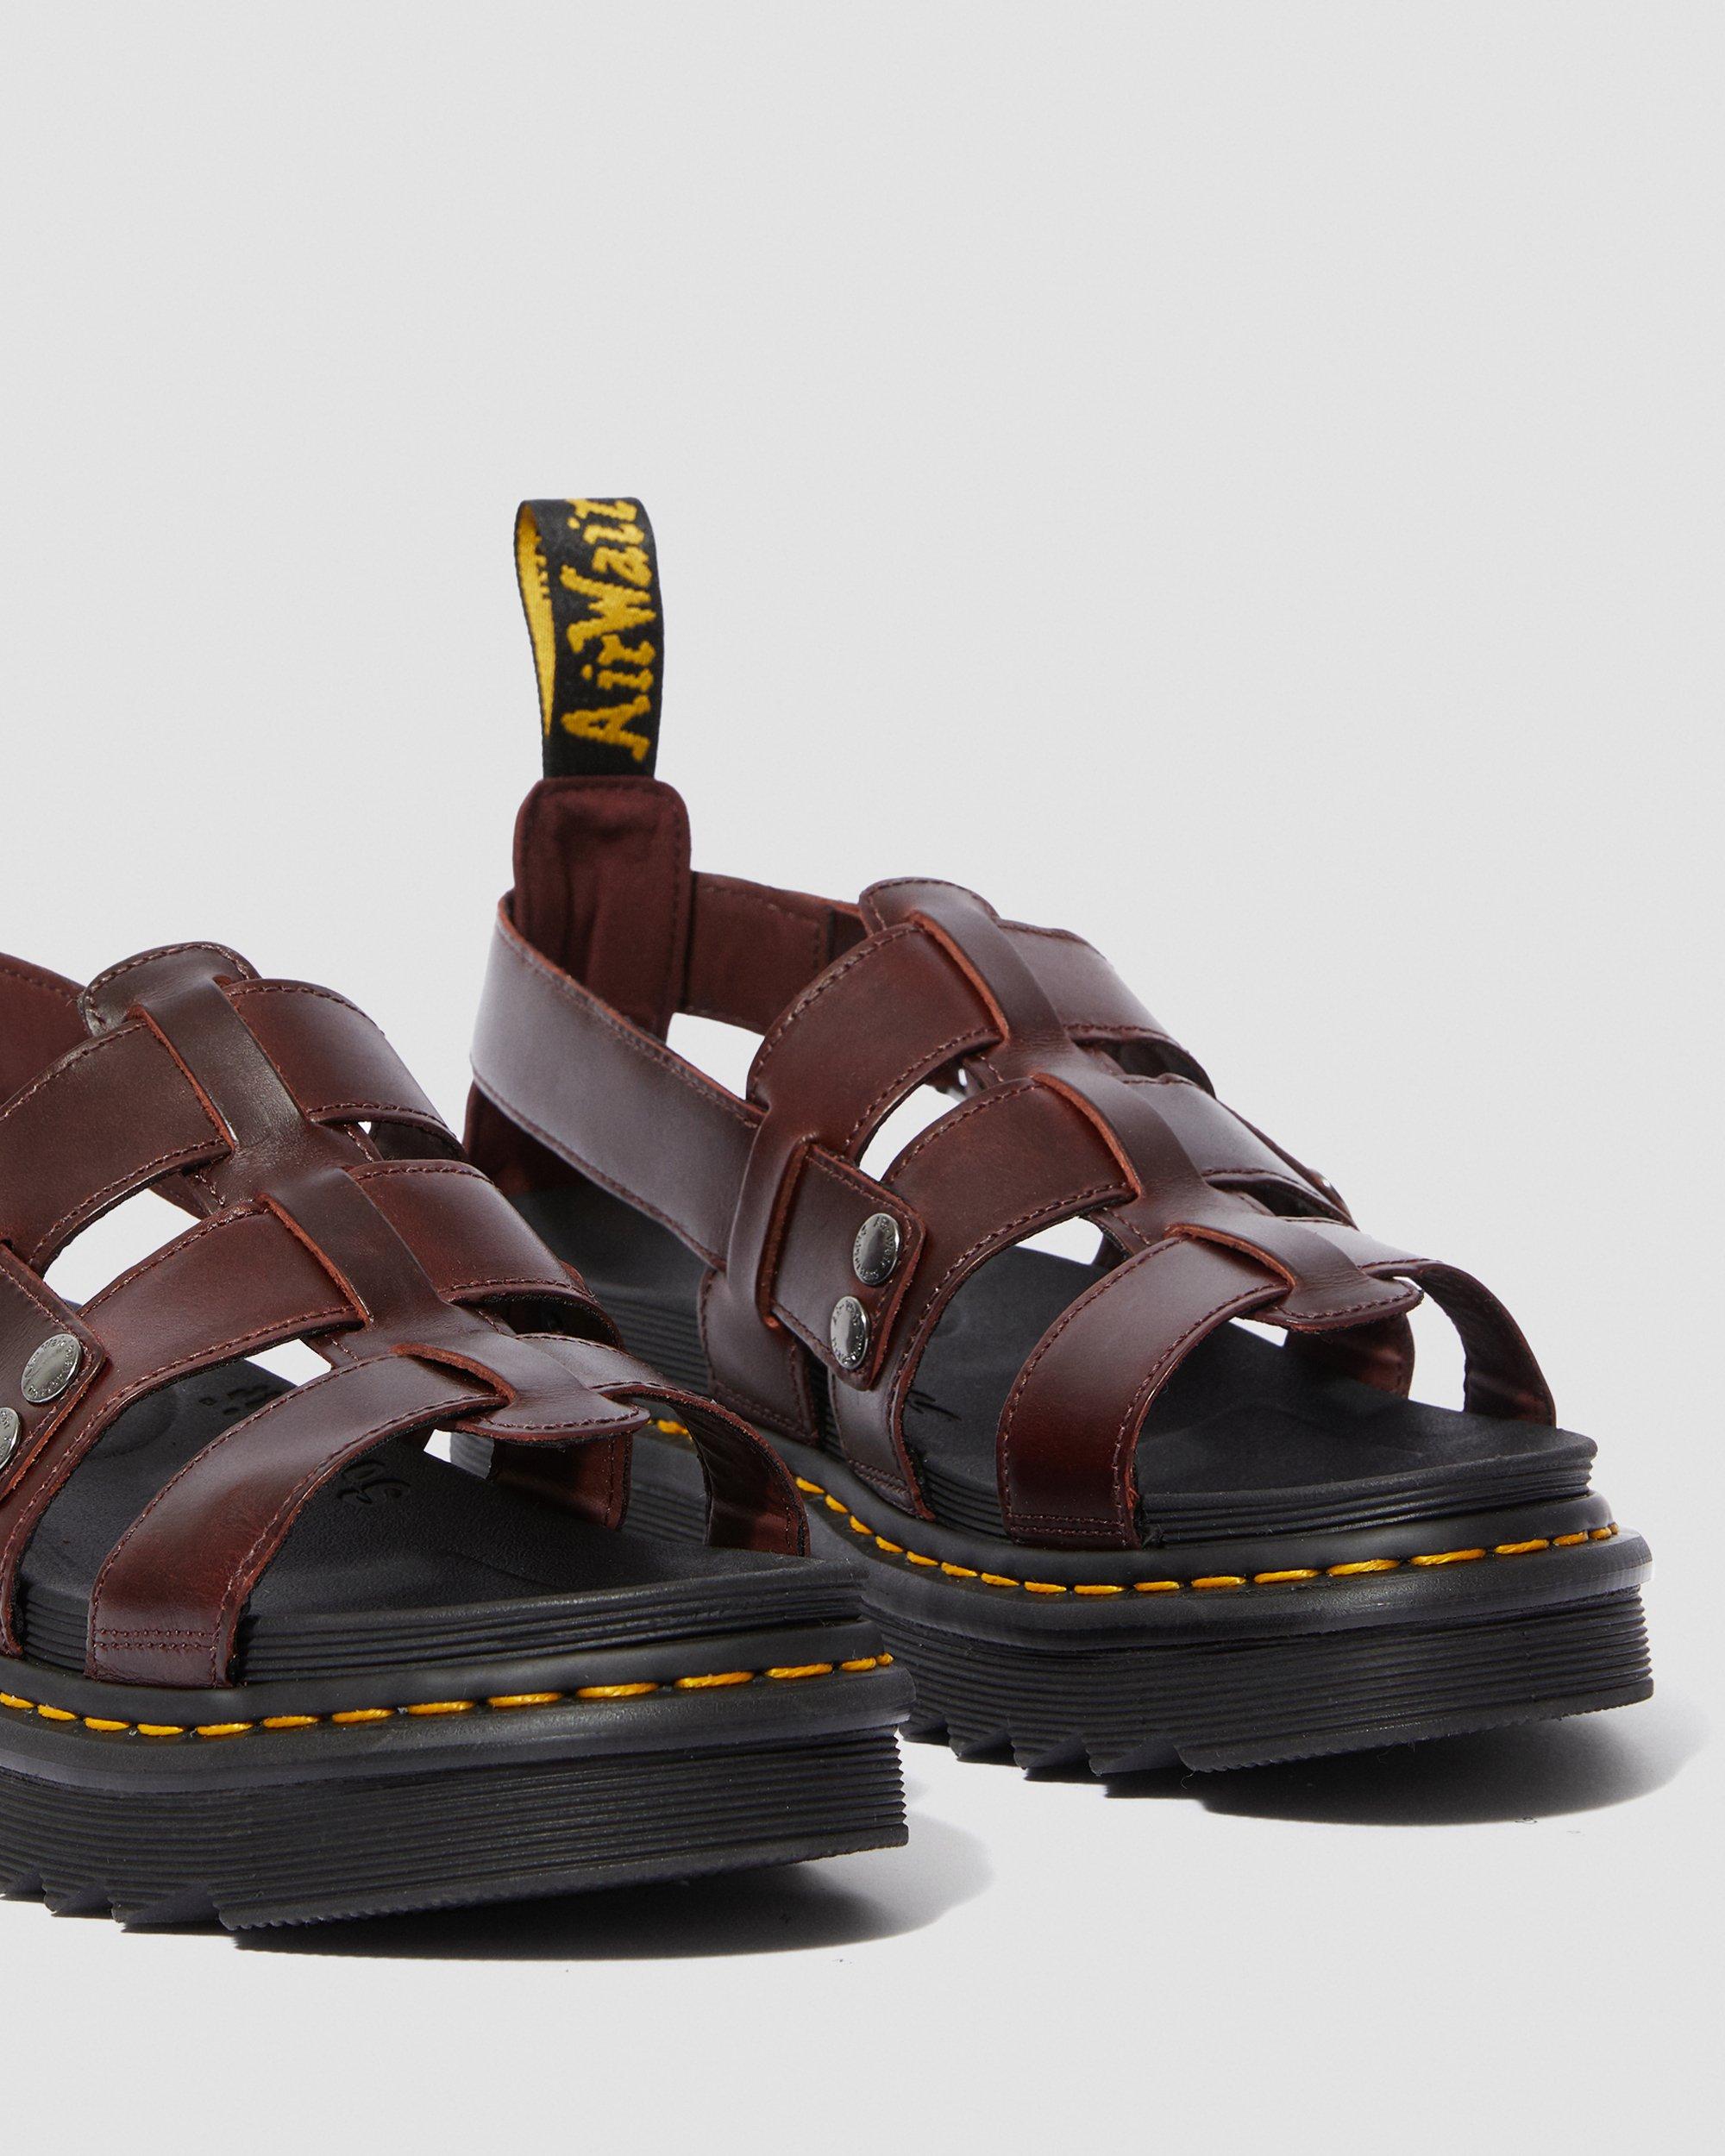 TERRY LEATHER SANDALS Dr. Martens